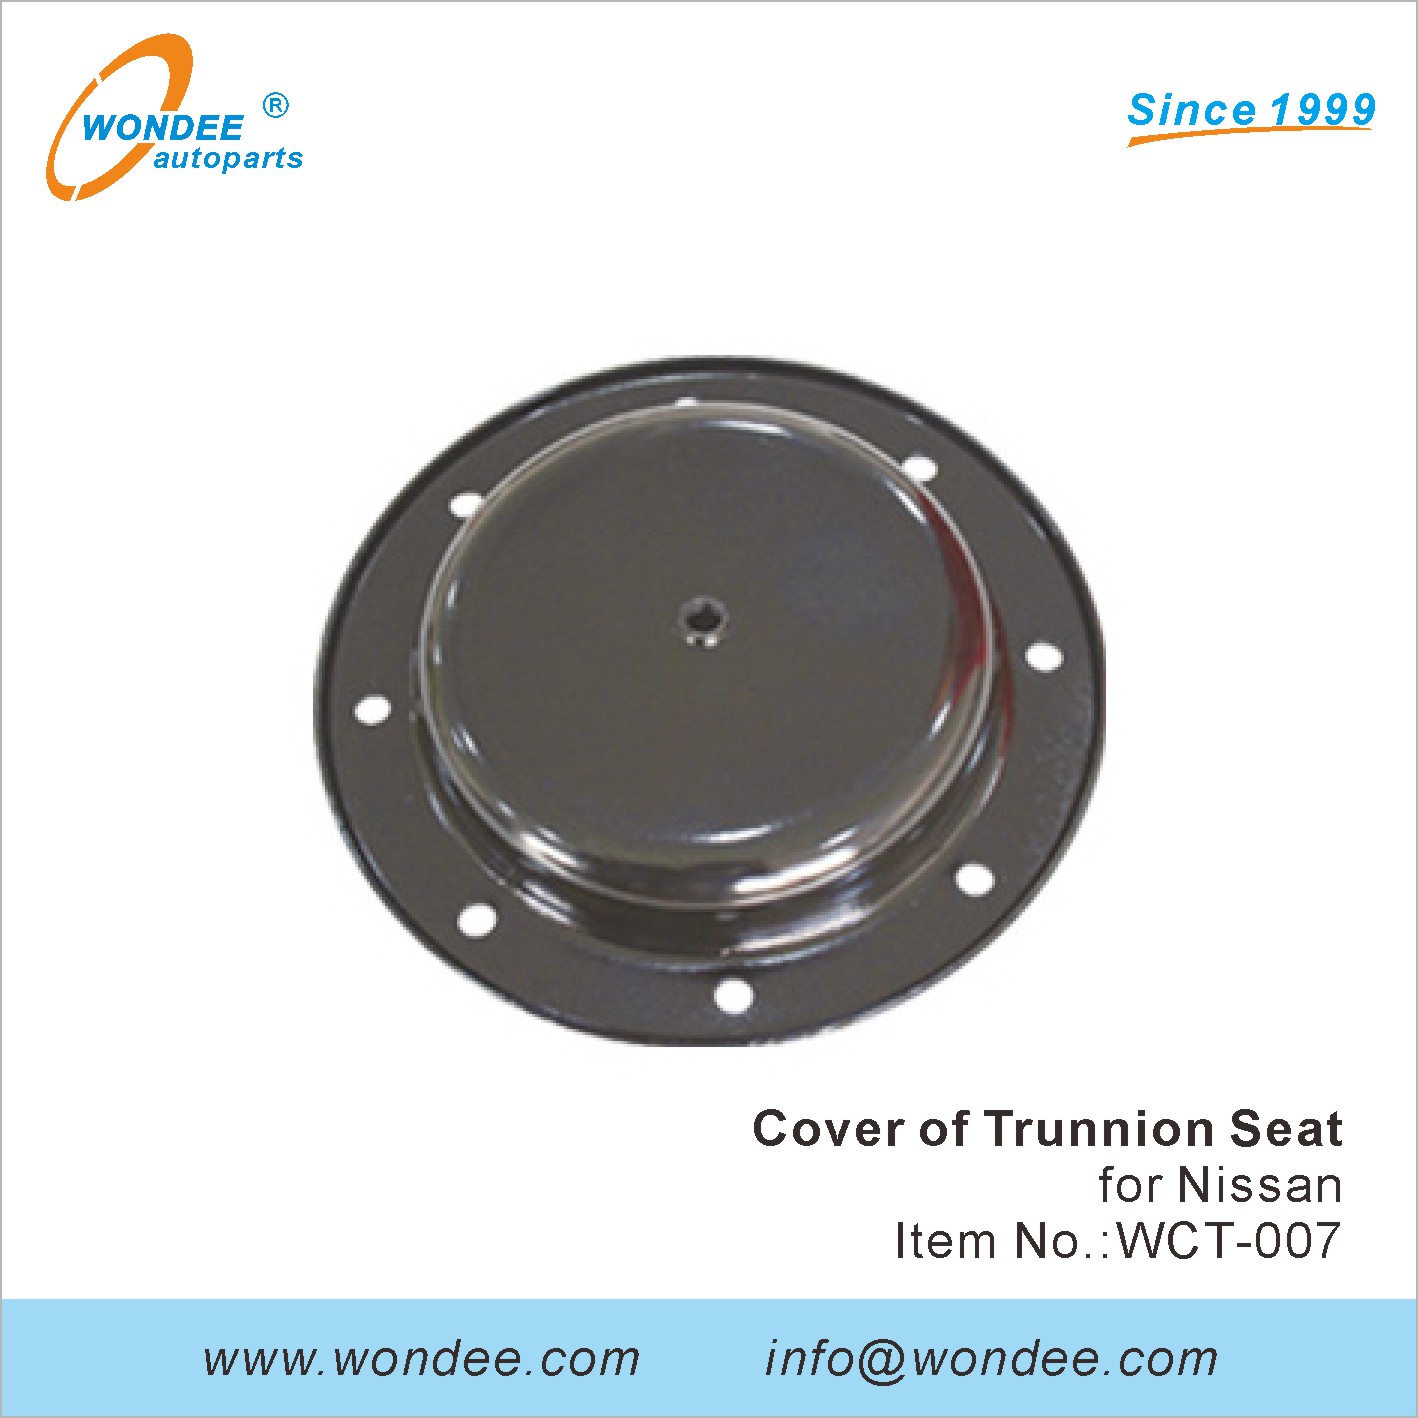 WONDEE cover of trunnion seat (7)